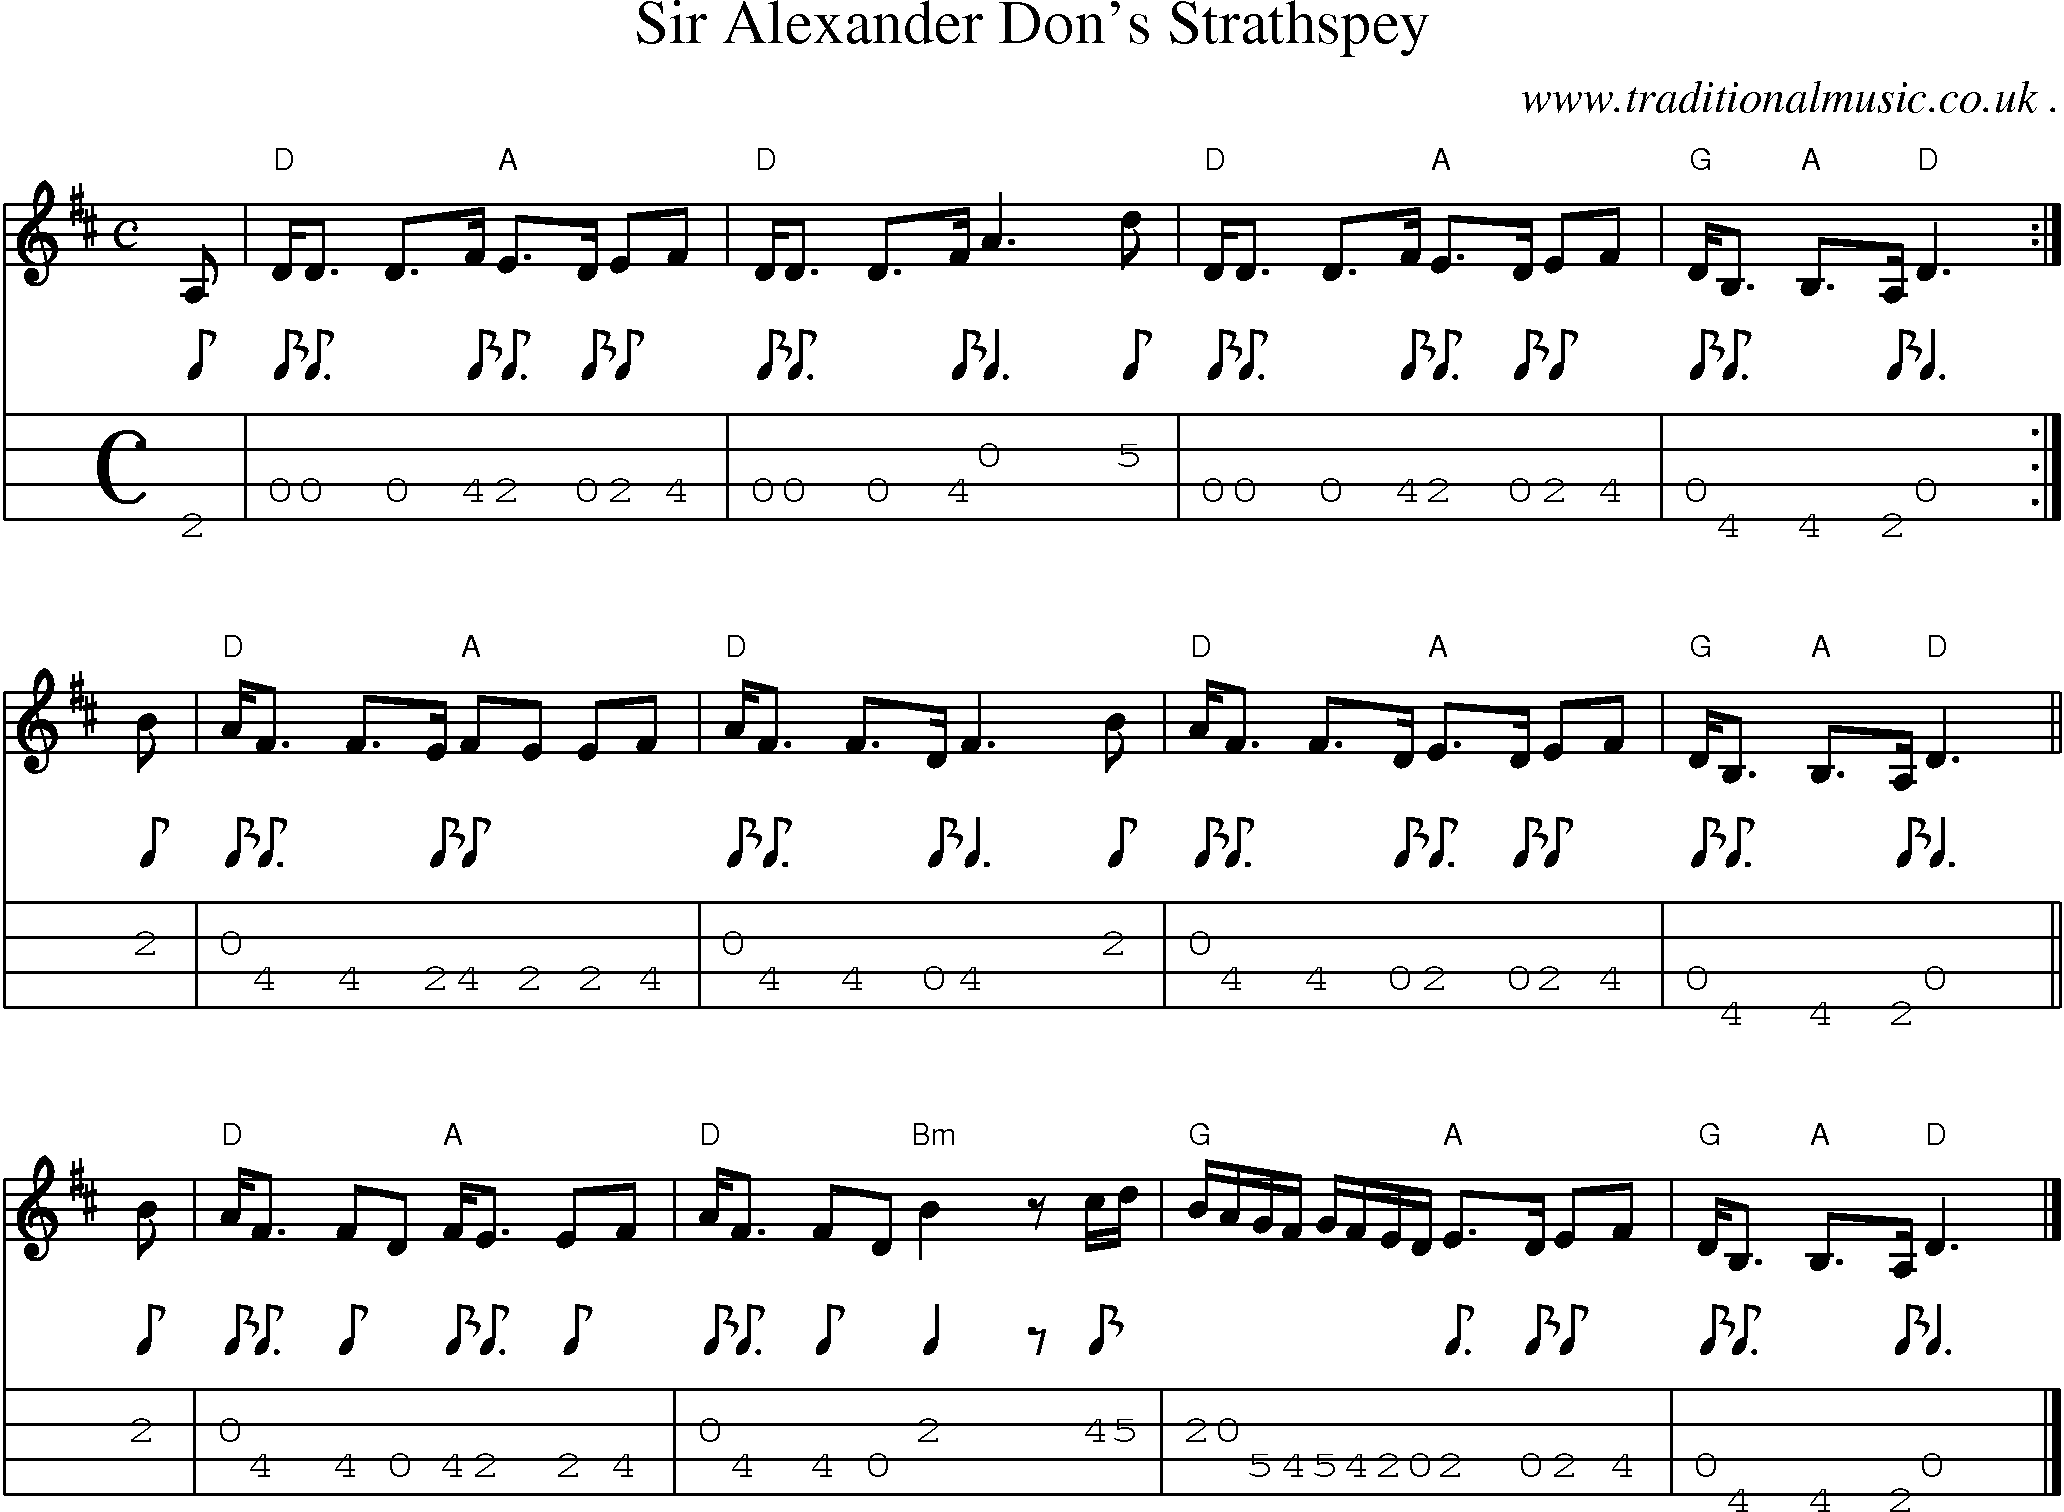 Sheet-music  score, Chords and Mandolin Tabs for Sir Alexander Dons Strathspey